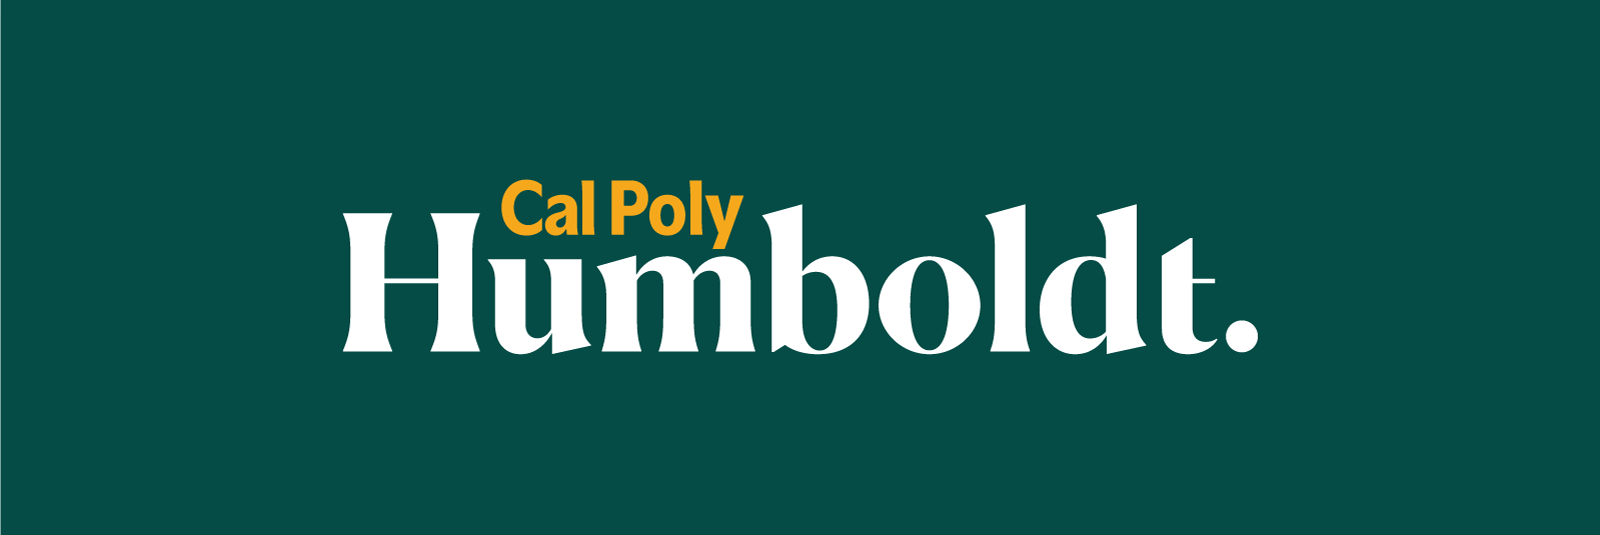 cal poly humboldt primary logo